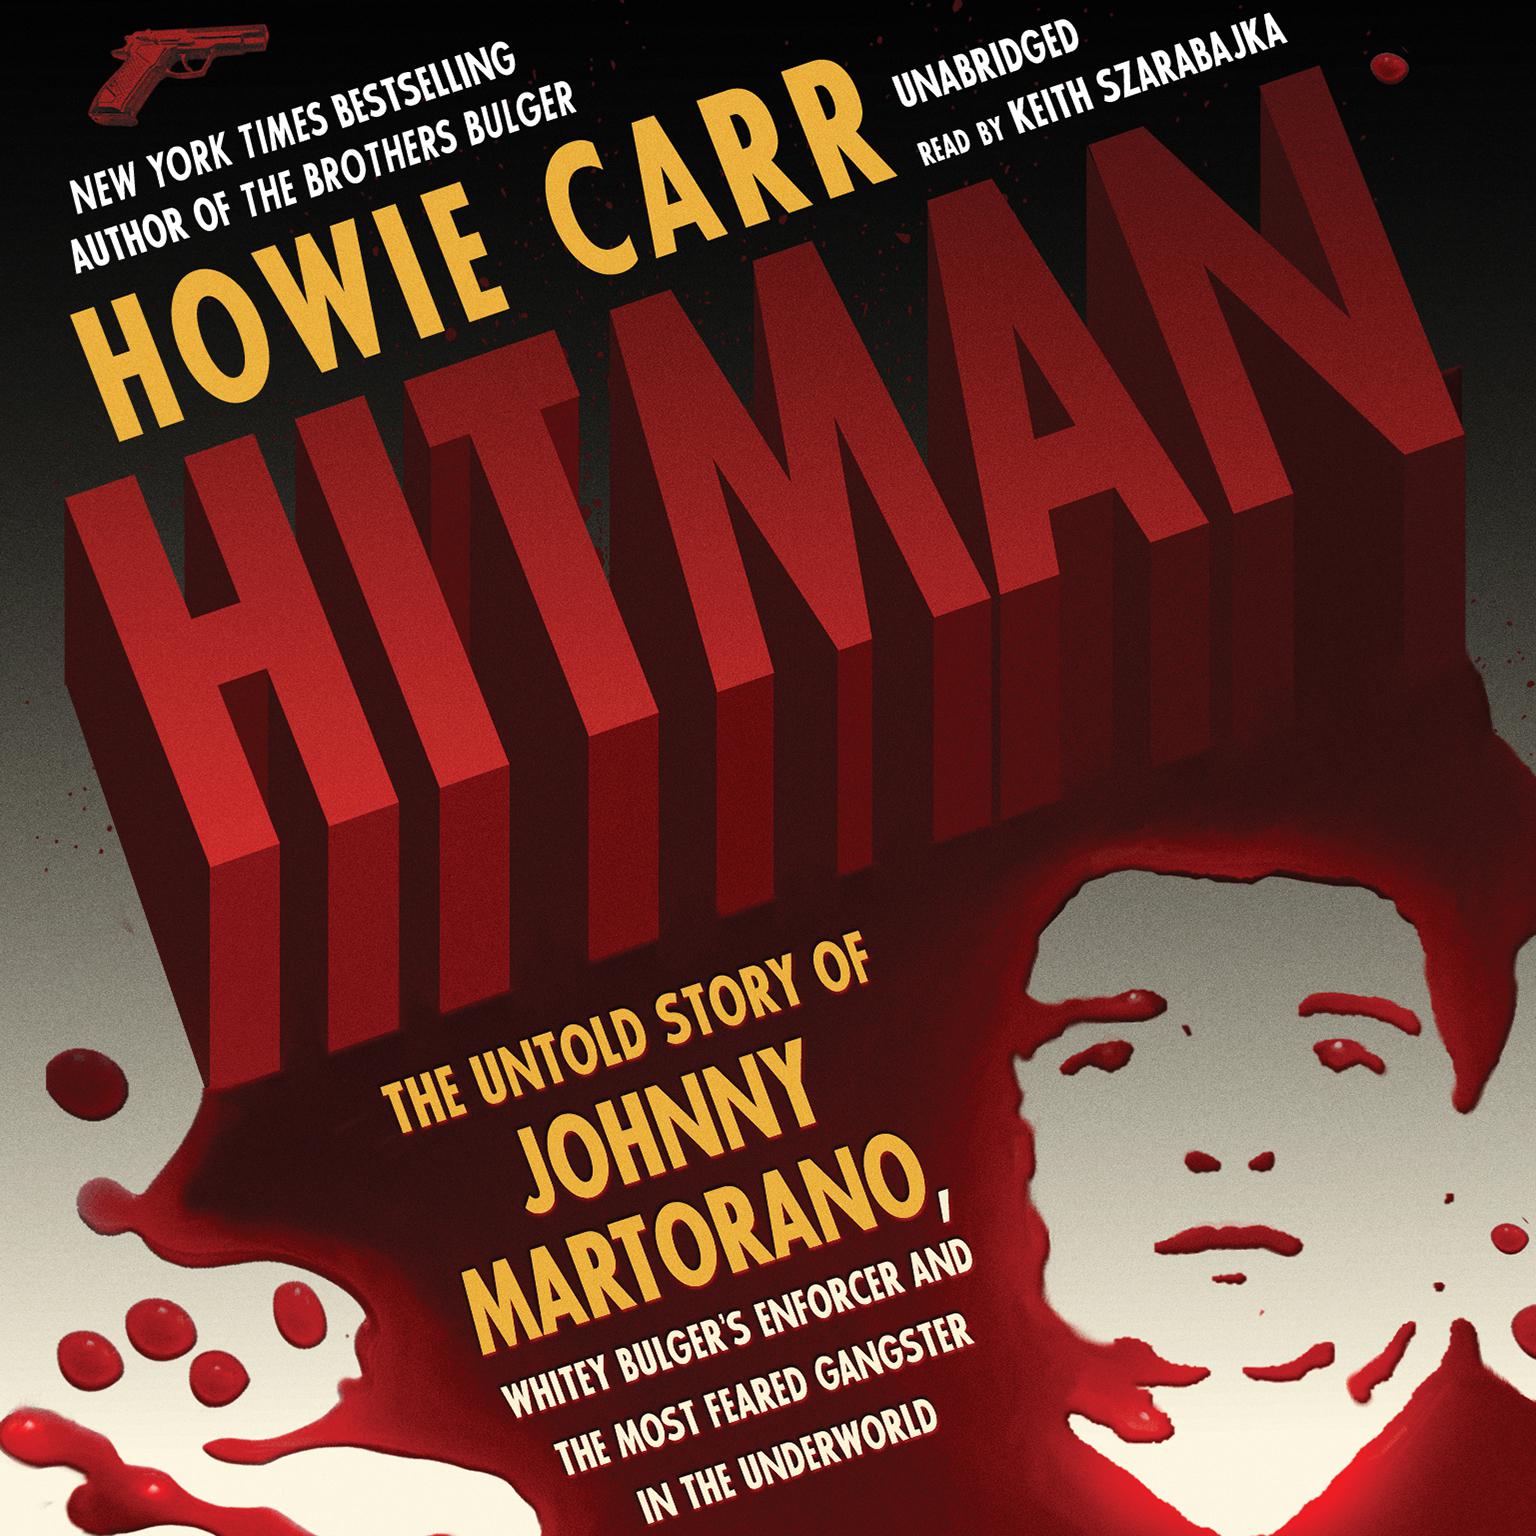 Hitman: The Untold Story of Johnny Martorano, Whitey Bulger’s Enforcer and the Most Feared Gangster in the Underworld Audiobook, by Howie Carr